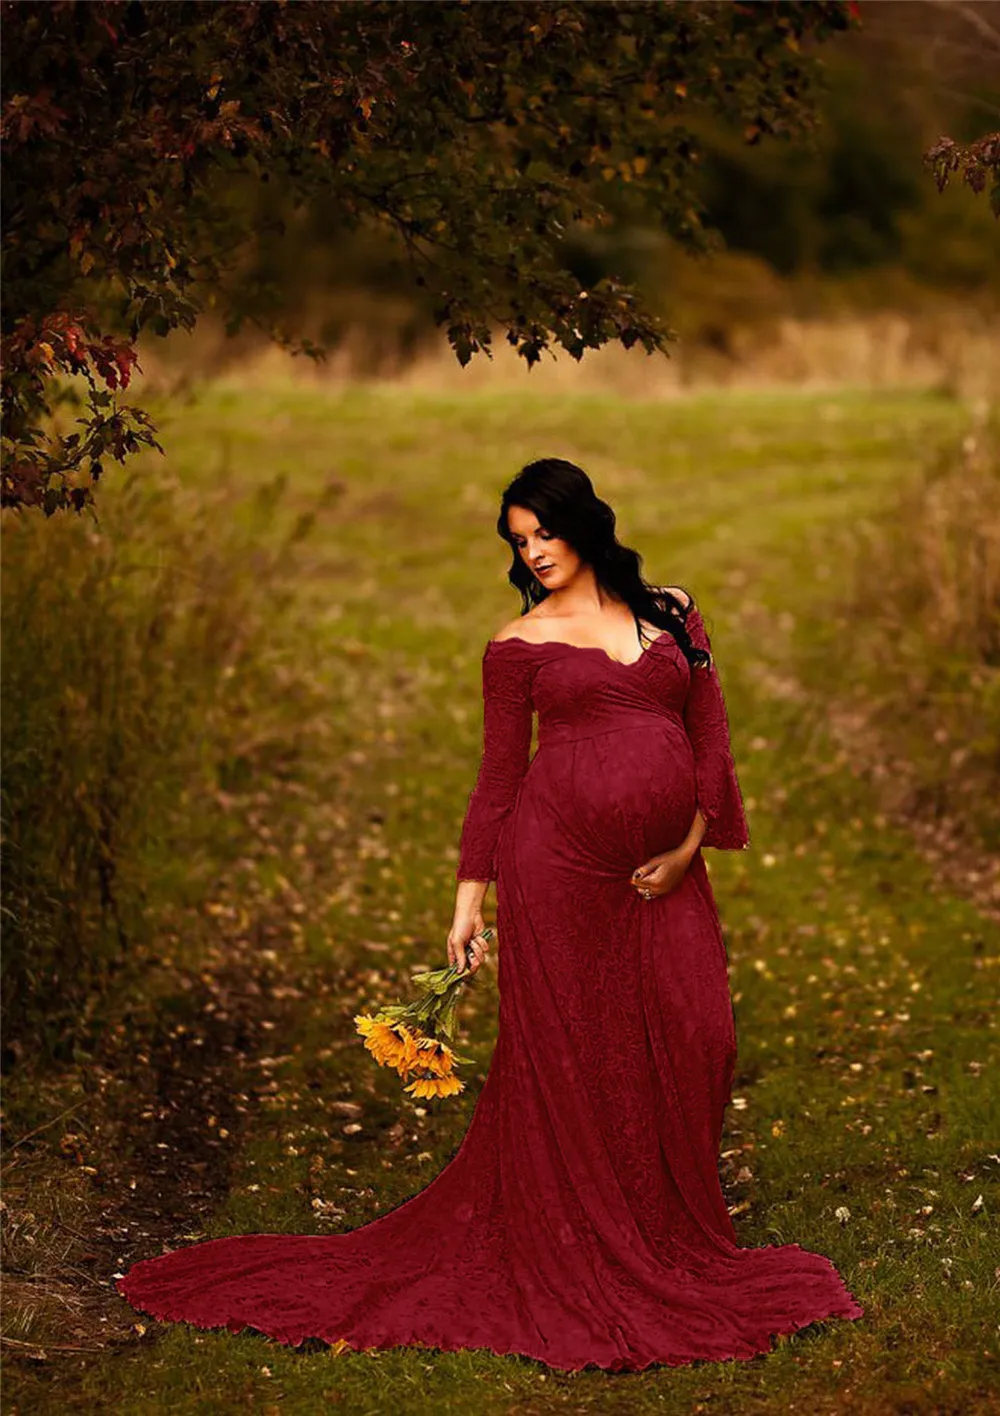 Long Maternity Dresses For Photo Shoot Sexy Lace Fancy Pregnancy Dresses Flare Sleeve Pregnant Women Maxi Gown Photography Props (14)